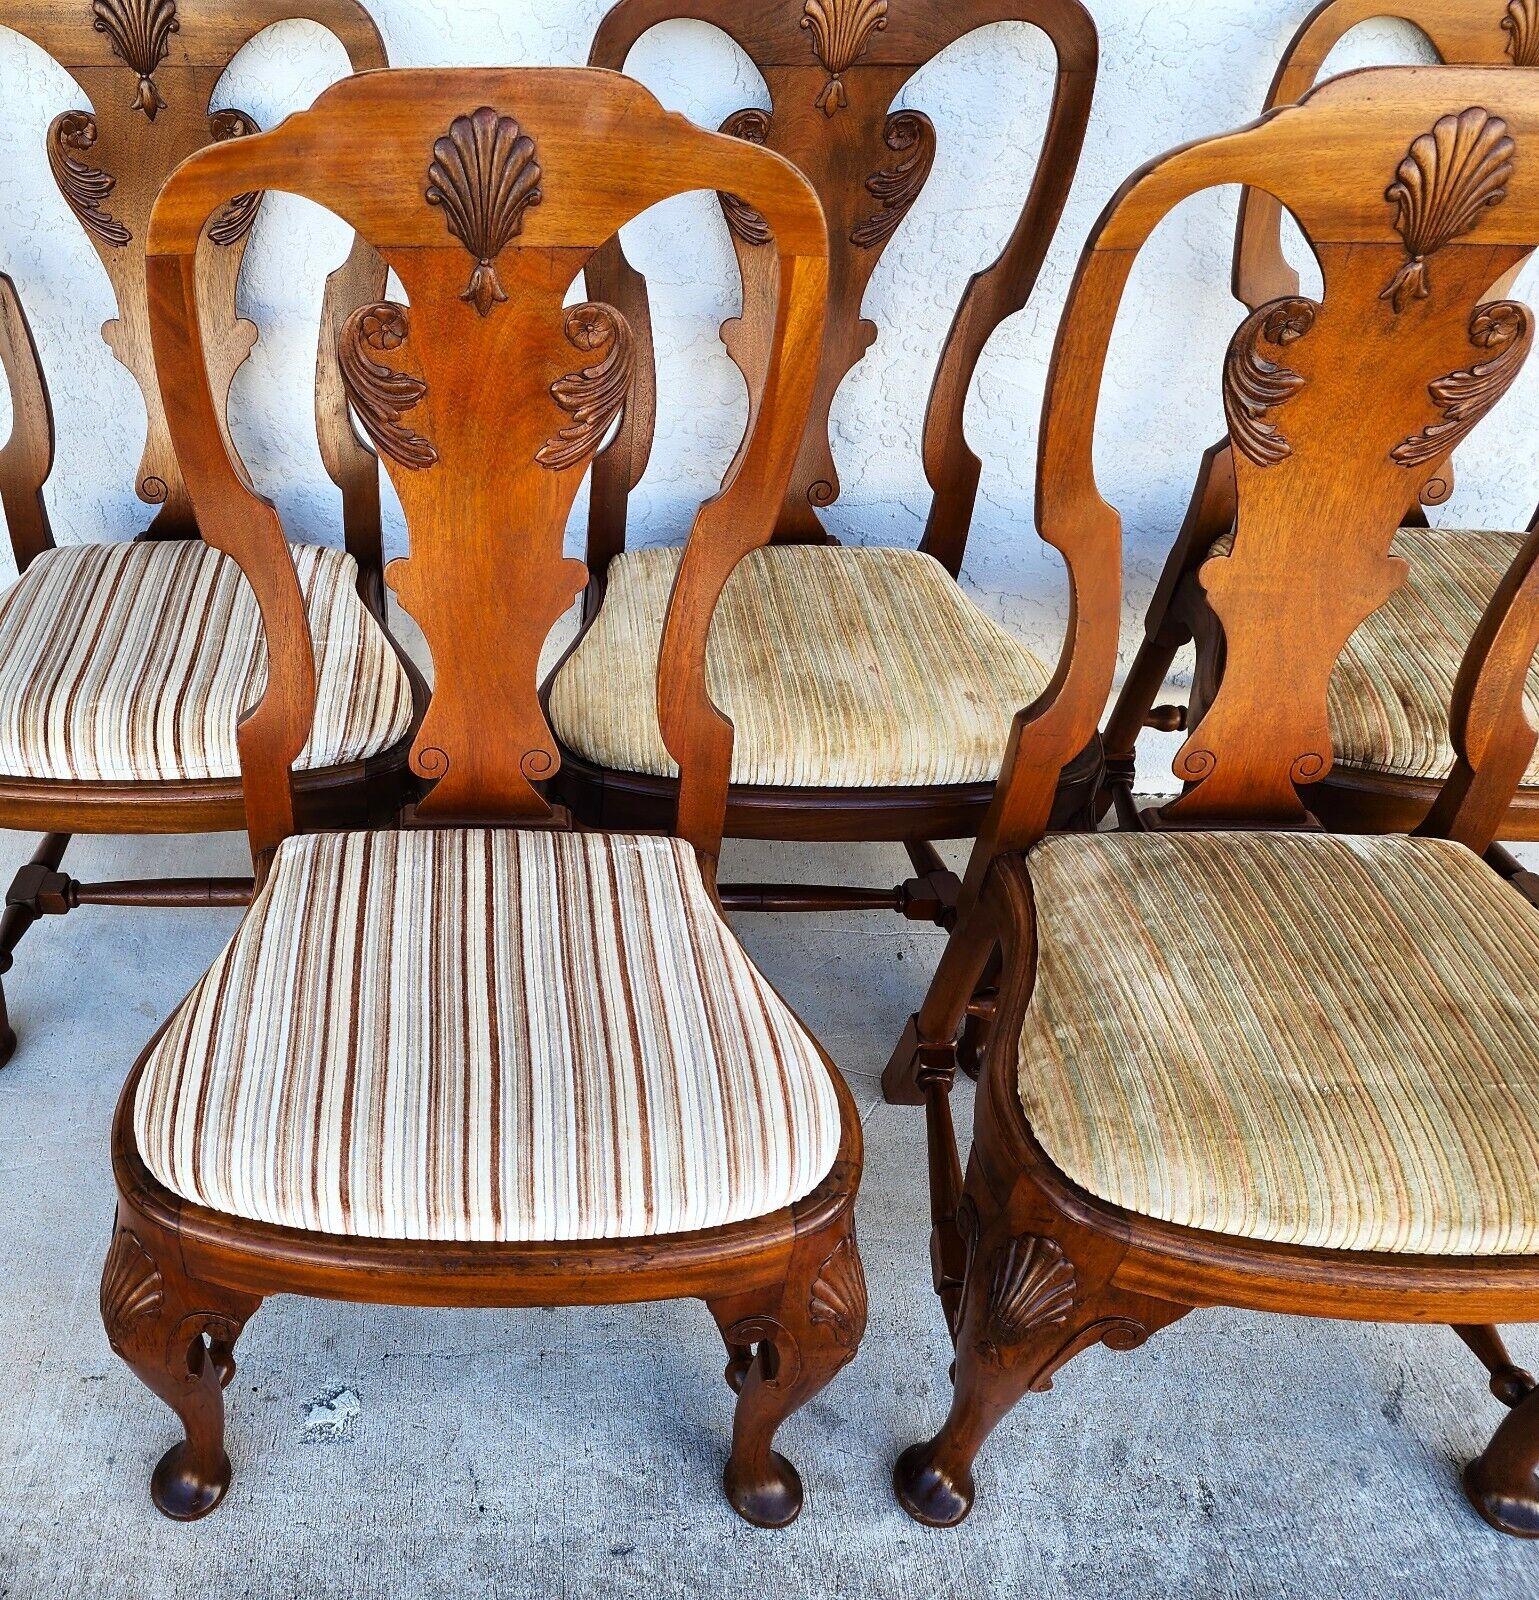 For FULL item description click on CONTINUE READING at the bottom of this page.

Offering One Of Our Recent Palm Beach Estate Fine Furniture Acquisitions Of A 
Set of 5 Antique 1930s Italian Venetian Shell Dining Chairs in Solid Walnut 

Approximate